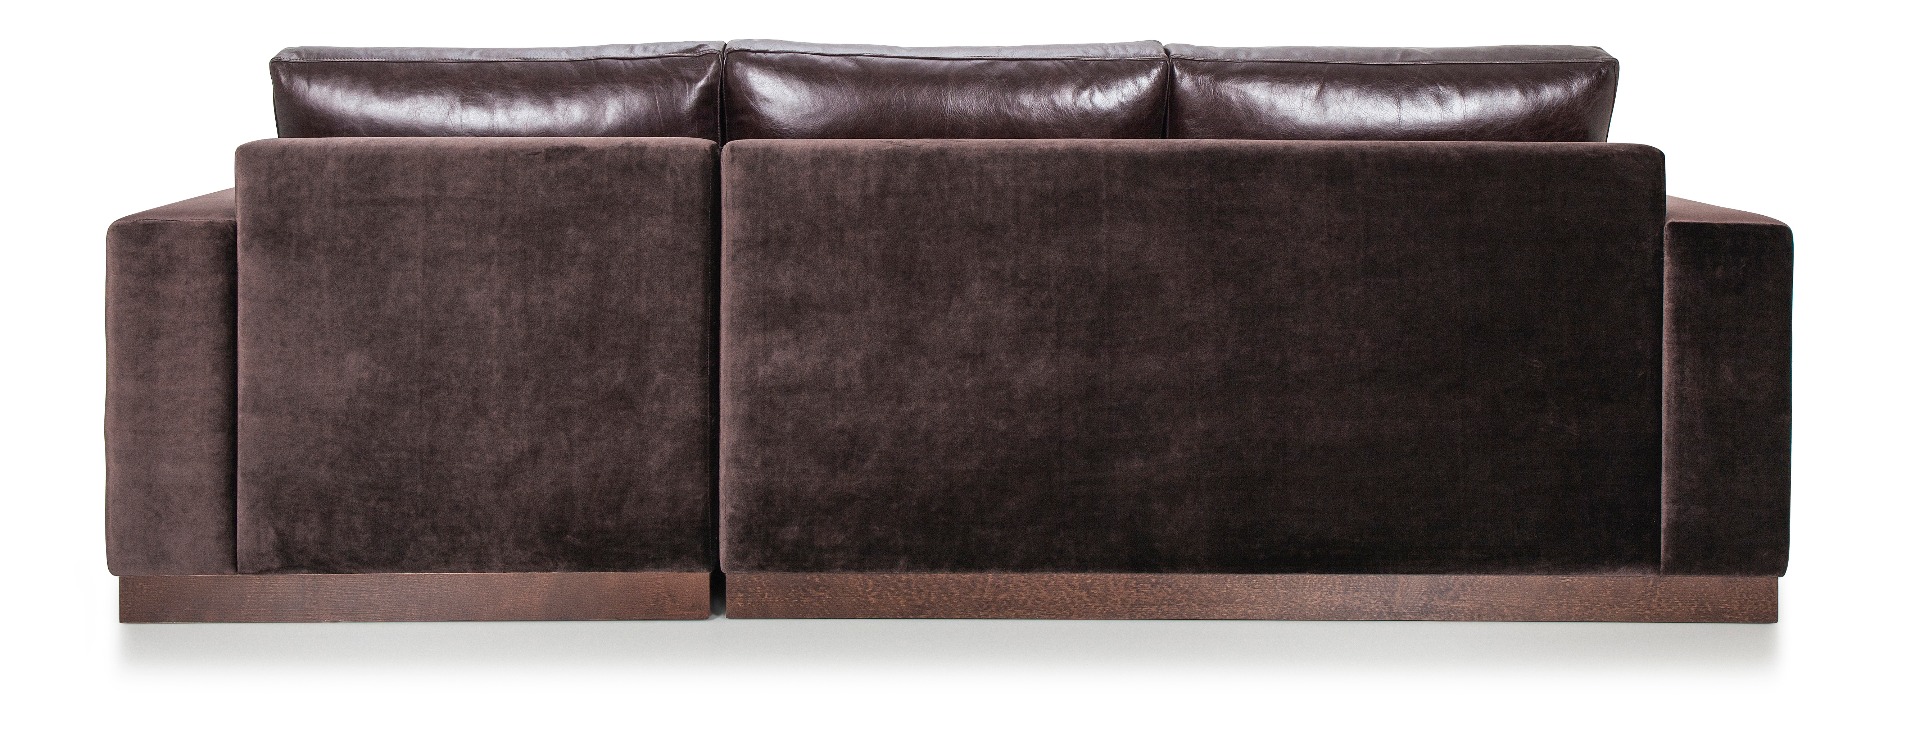 Luxury rich brown Omarz leather sofa by Luxuria London